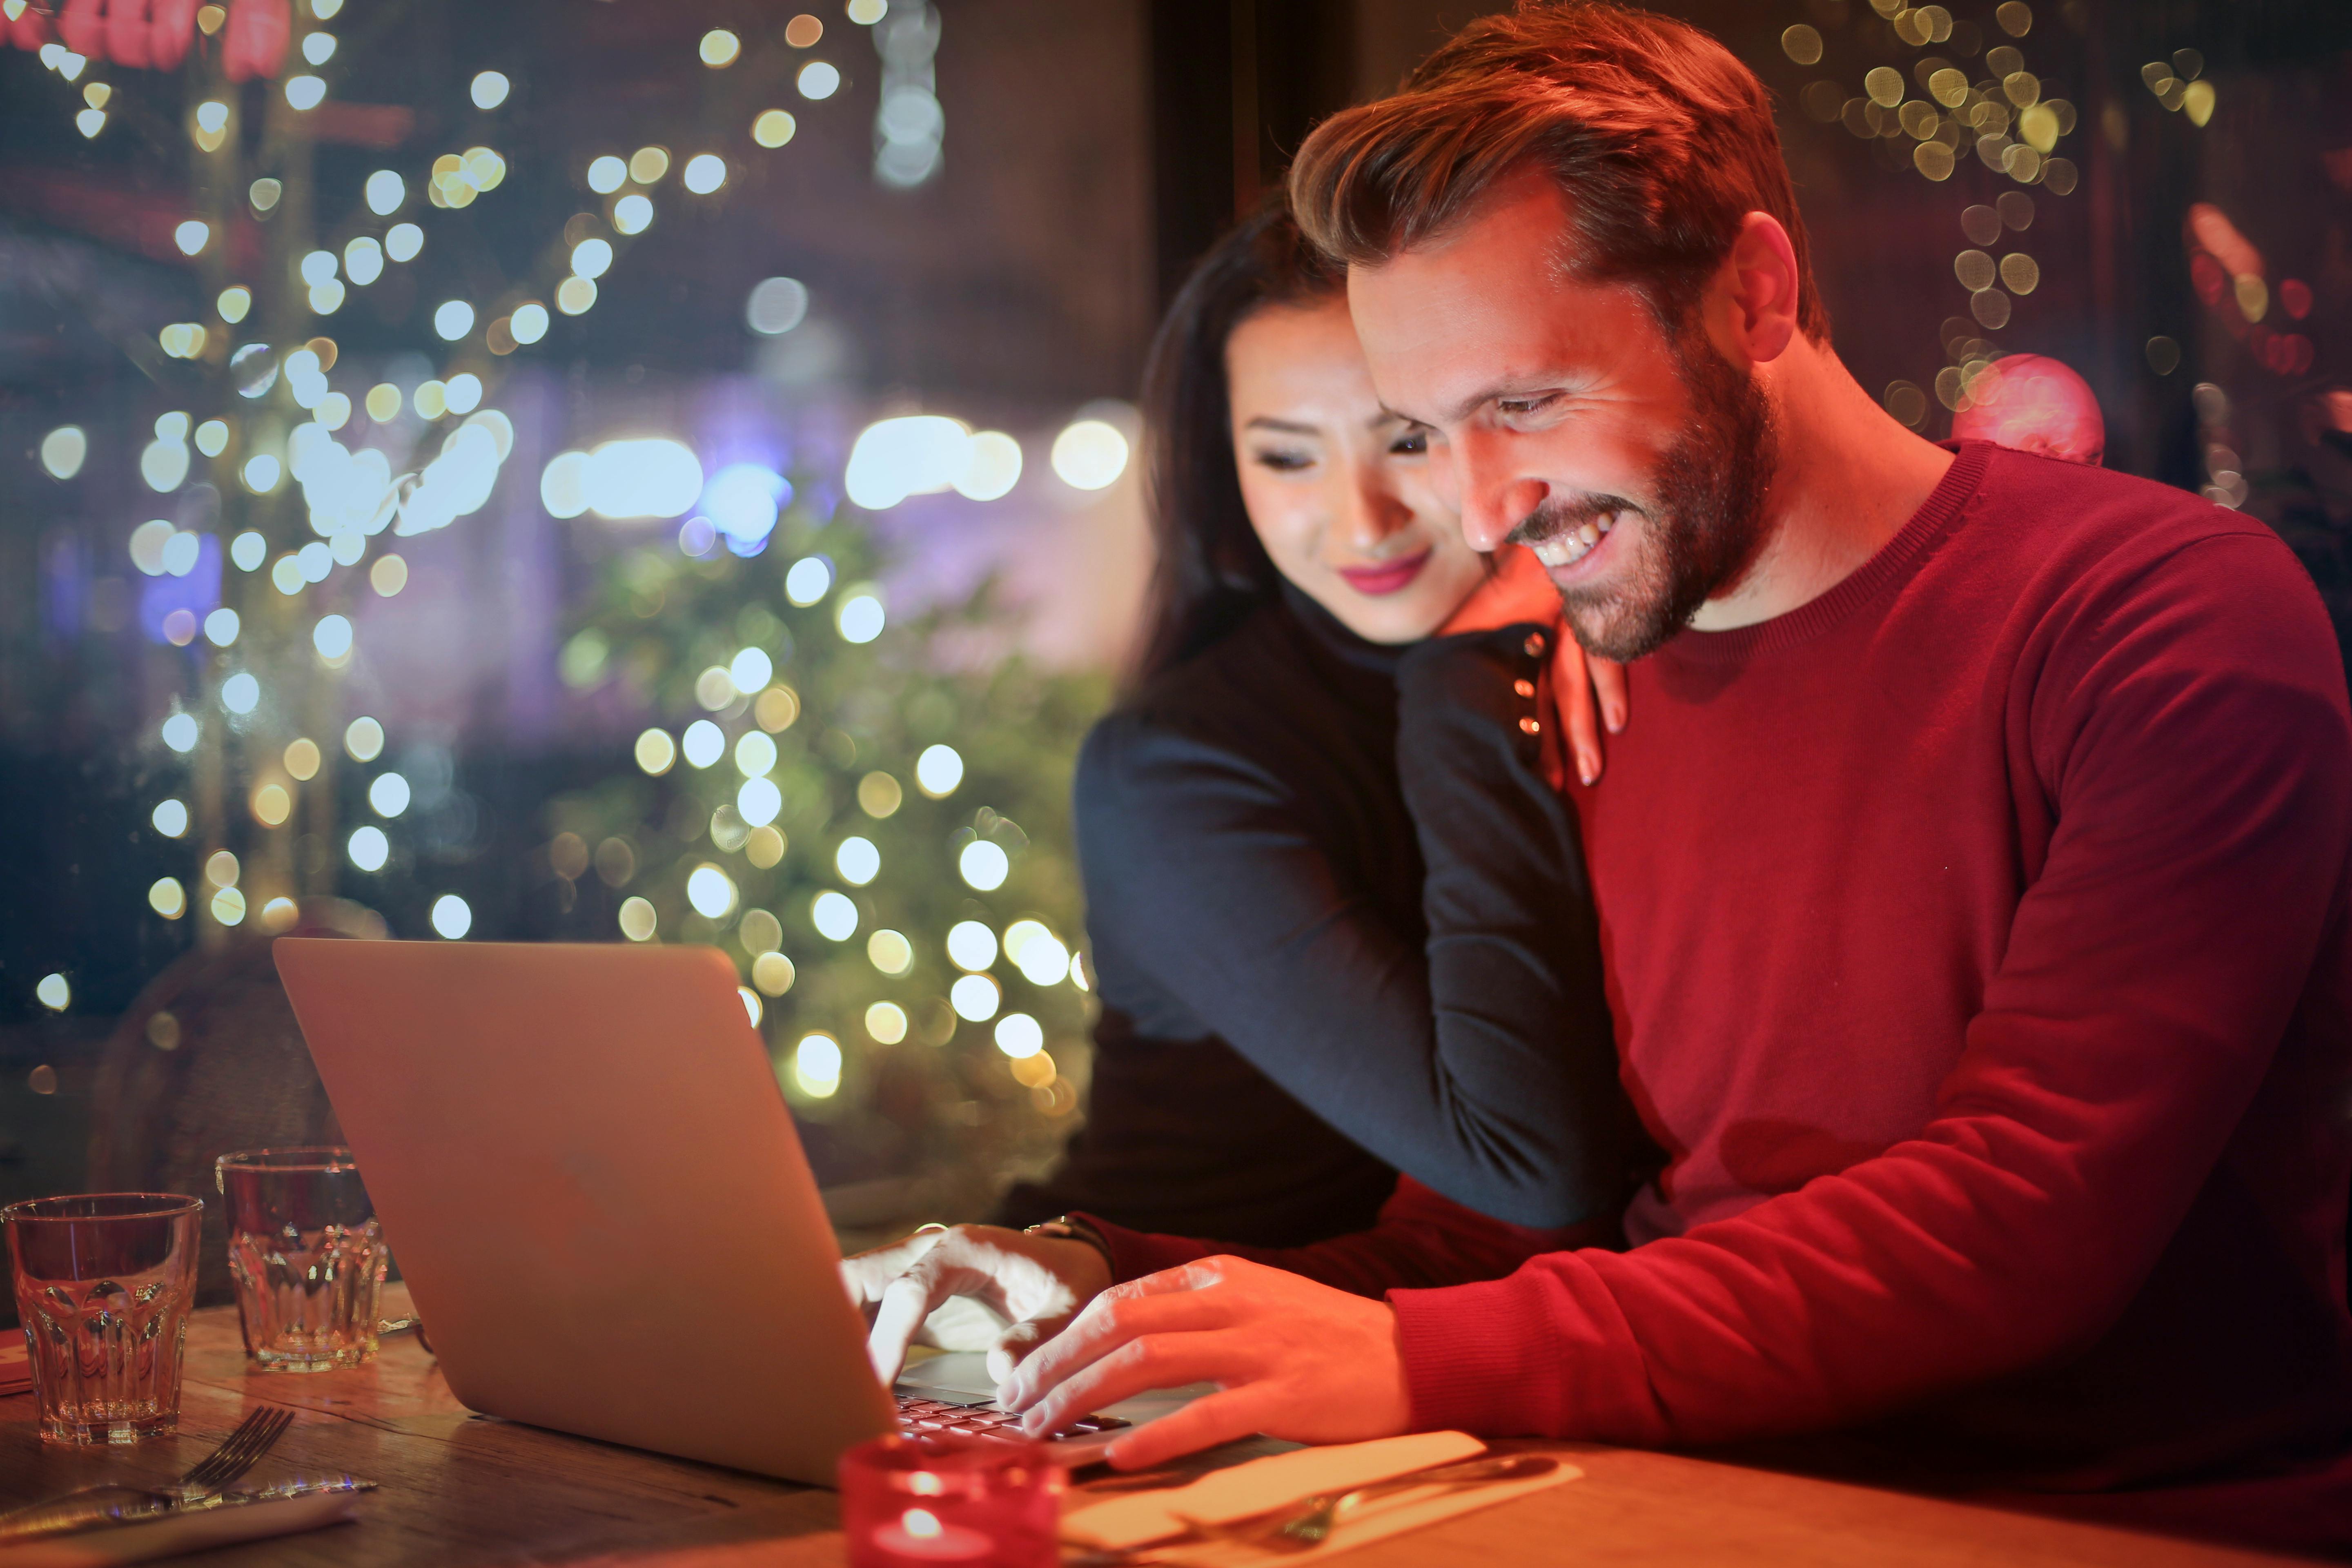 A happy couple bonding while looking at a laptop | Source: Pexels